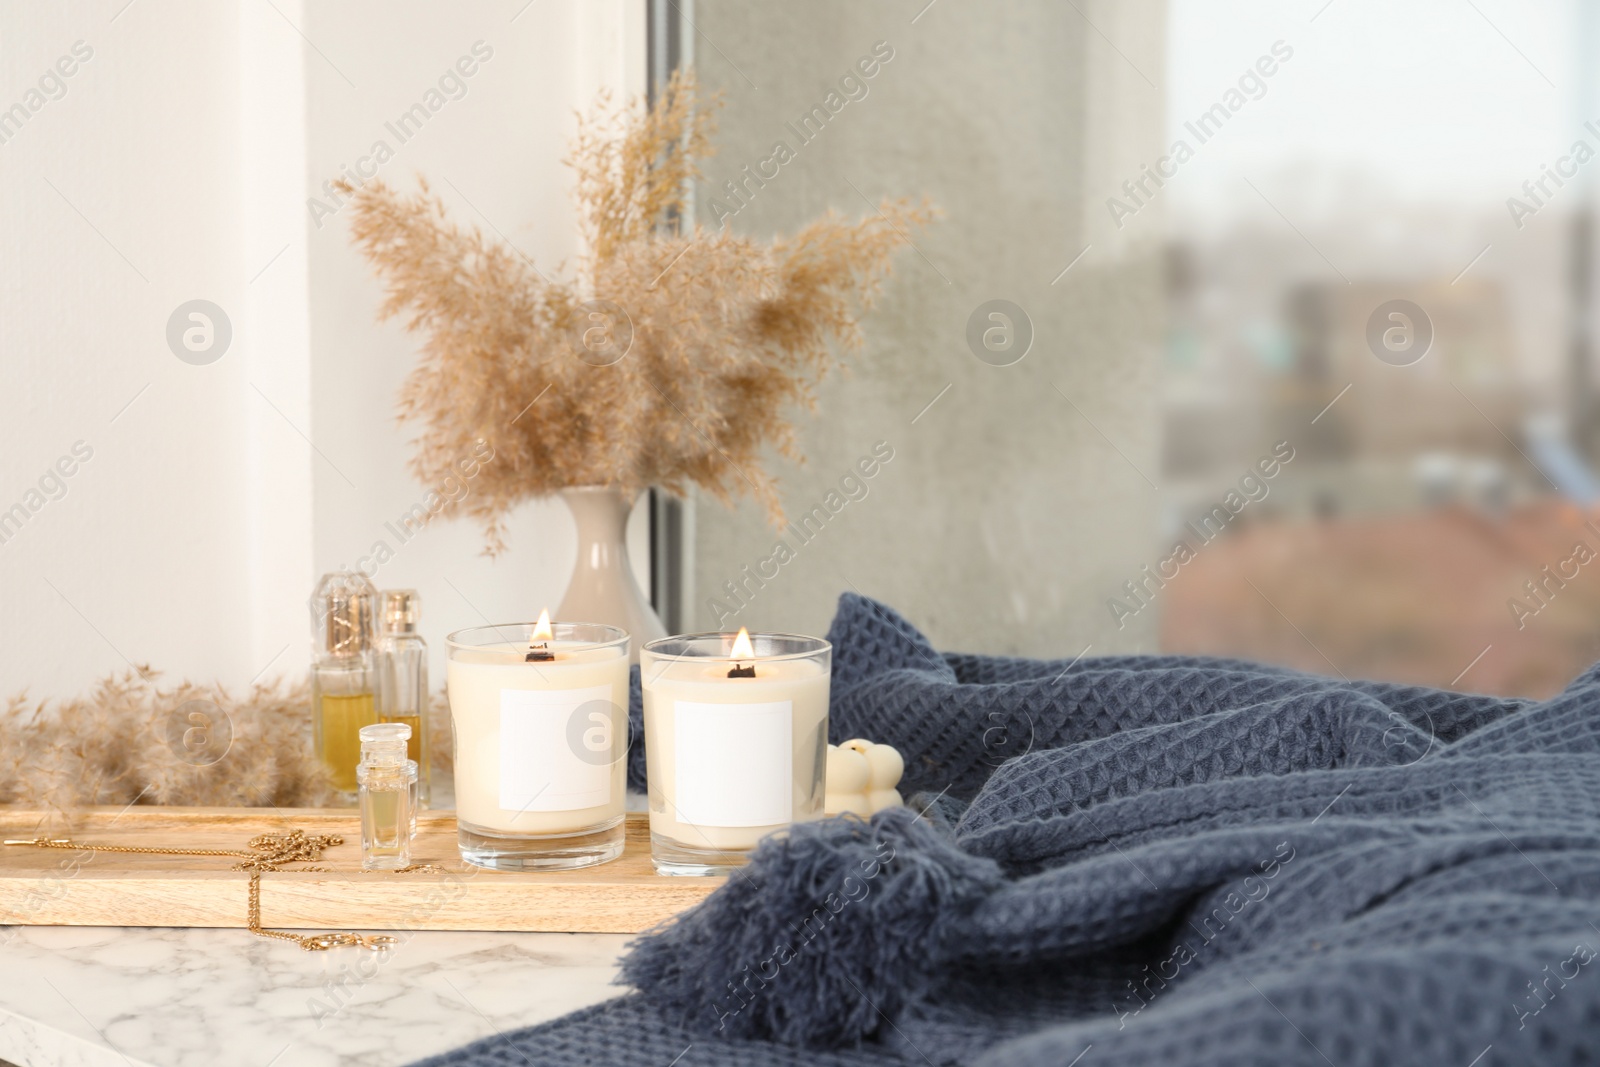 Photo of Burning soy candles, perfumes, blanket and stylish accessories on white window sill indoors